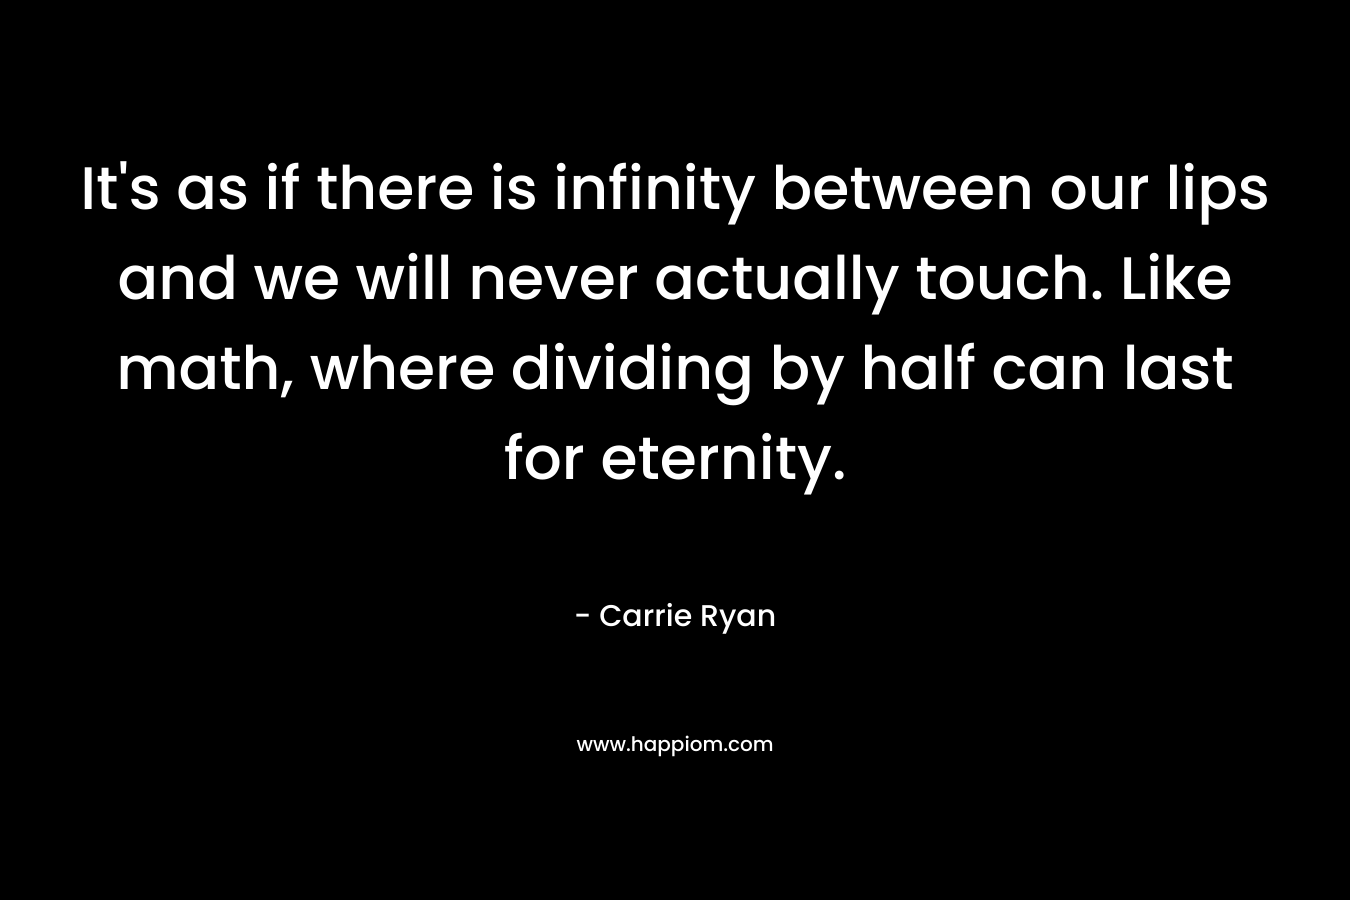 It’s as if there is infinity between our lips and we will never actually touch. Like math, where dividing by half can last for eternity. – Carrie Ryan